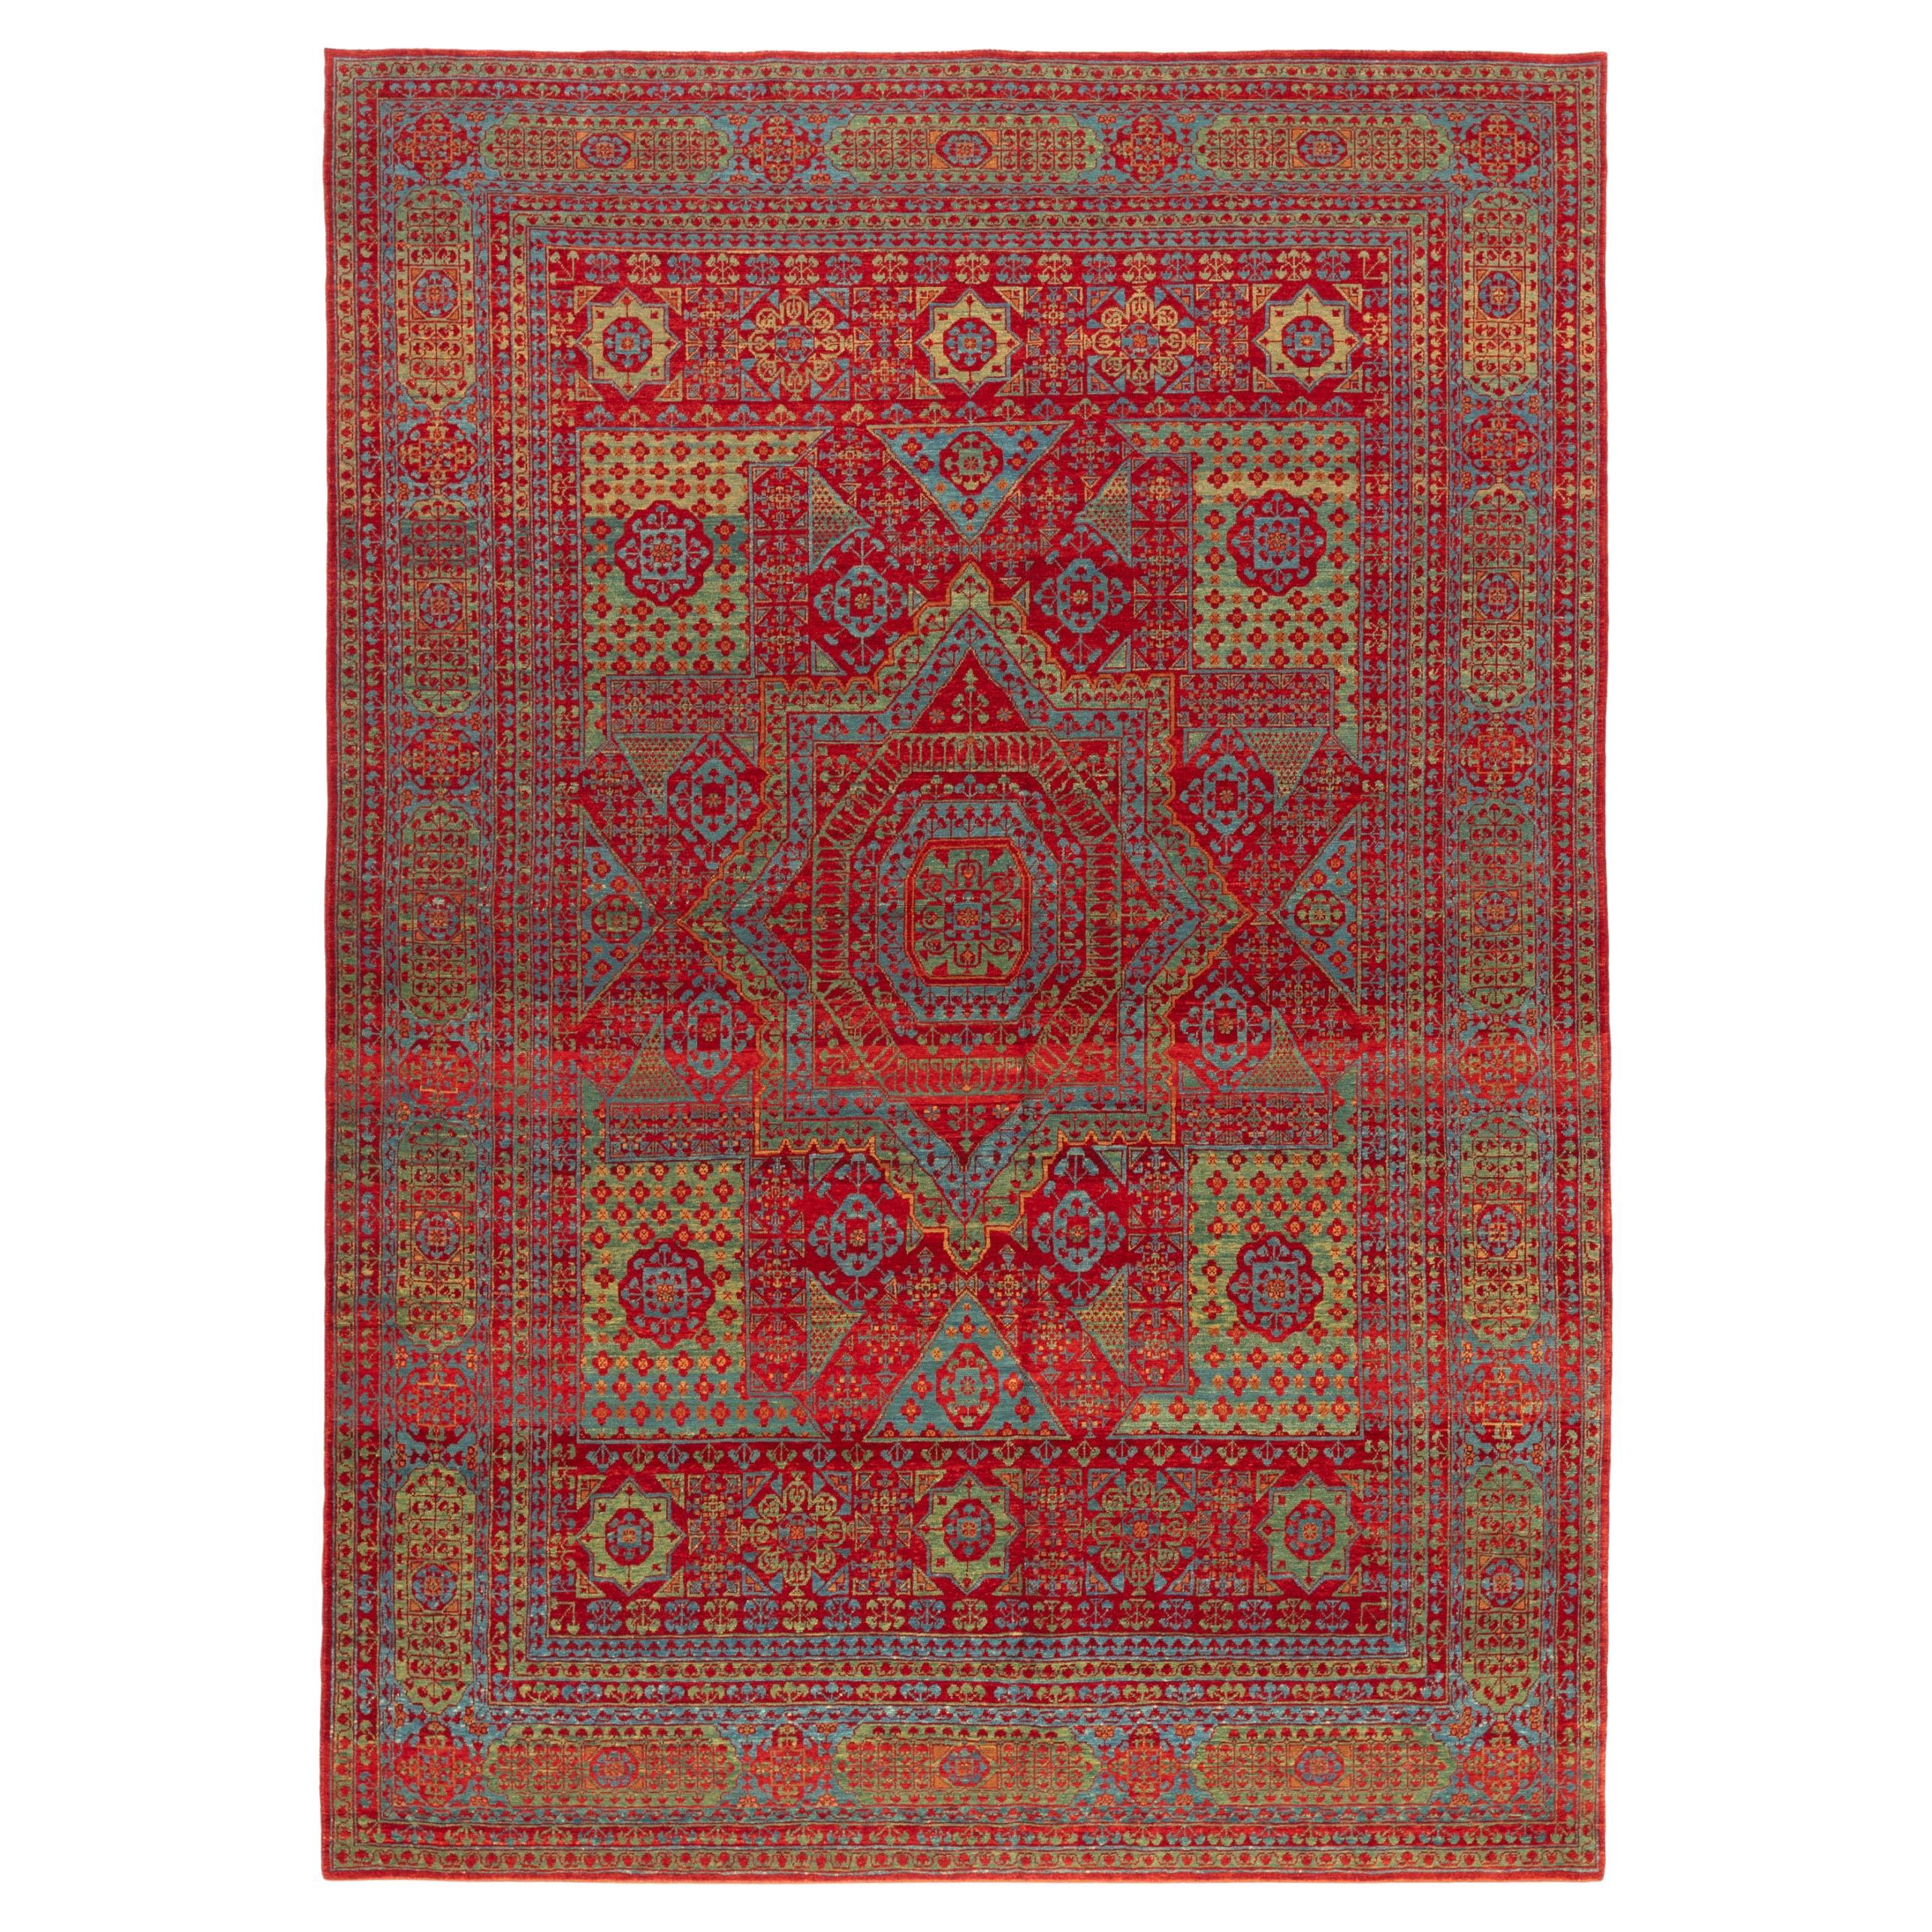 Ararat Rugs Mamluk Rug with Central Star, 16th C. Revival Carpet, Natural Dyed For Sale